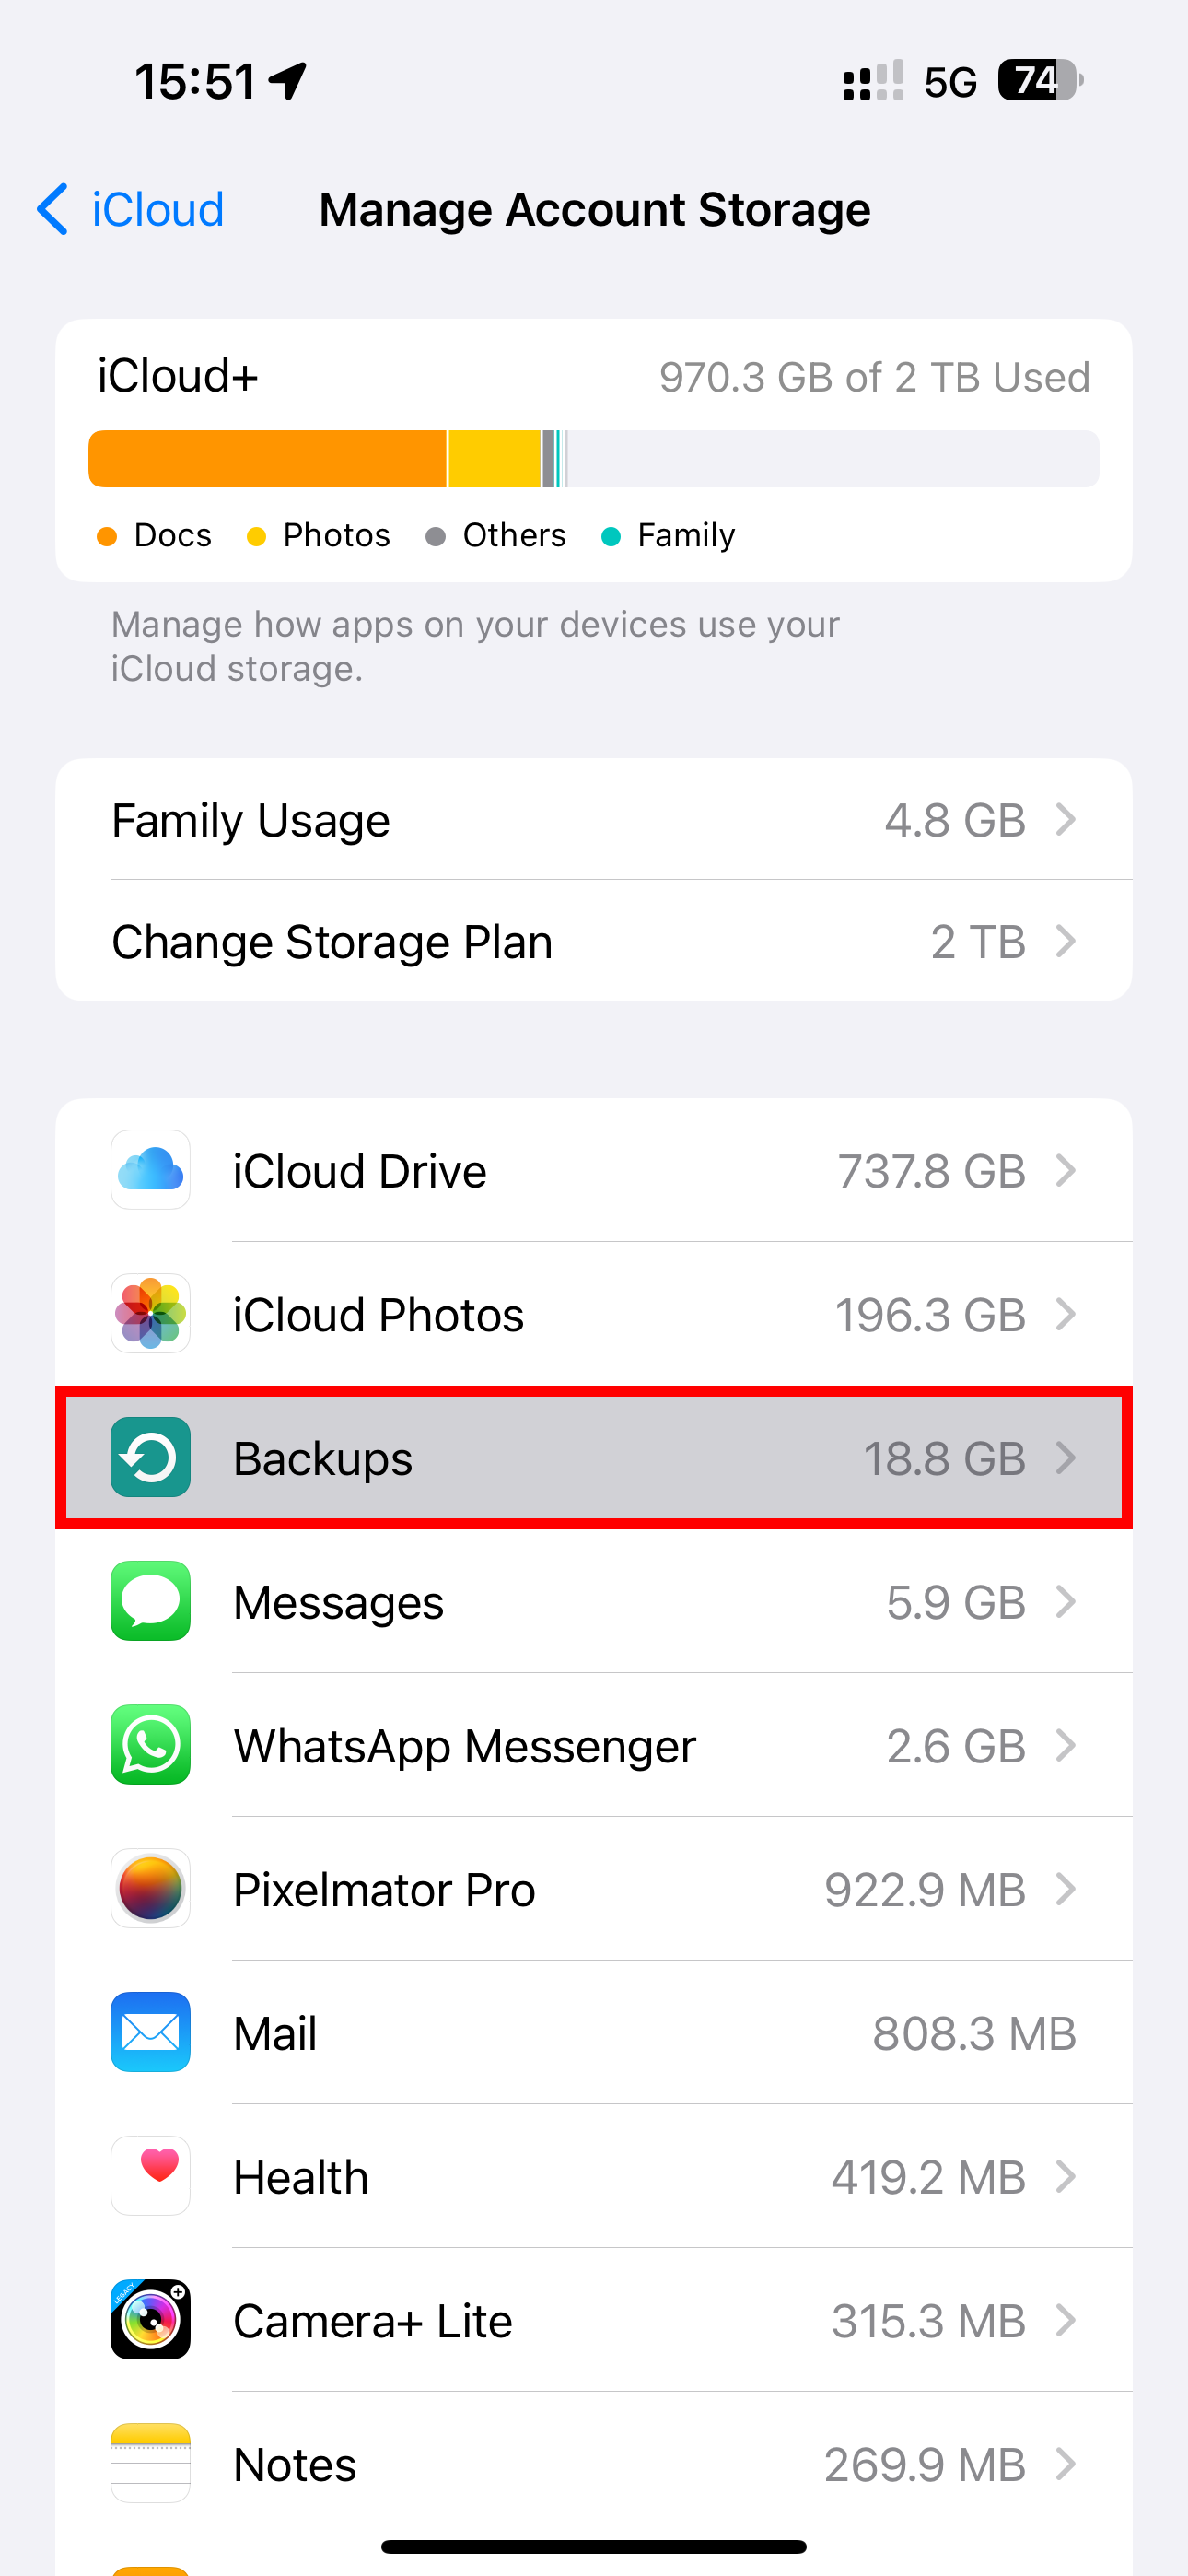 The iPhone's Settings app showing the iCloud settings with the Backups option selected on the Manage Account Storage screen